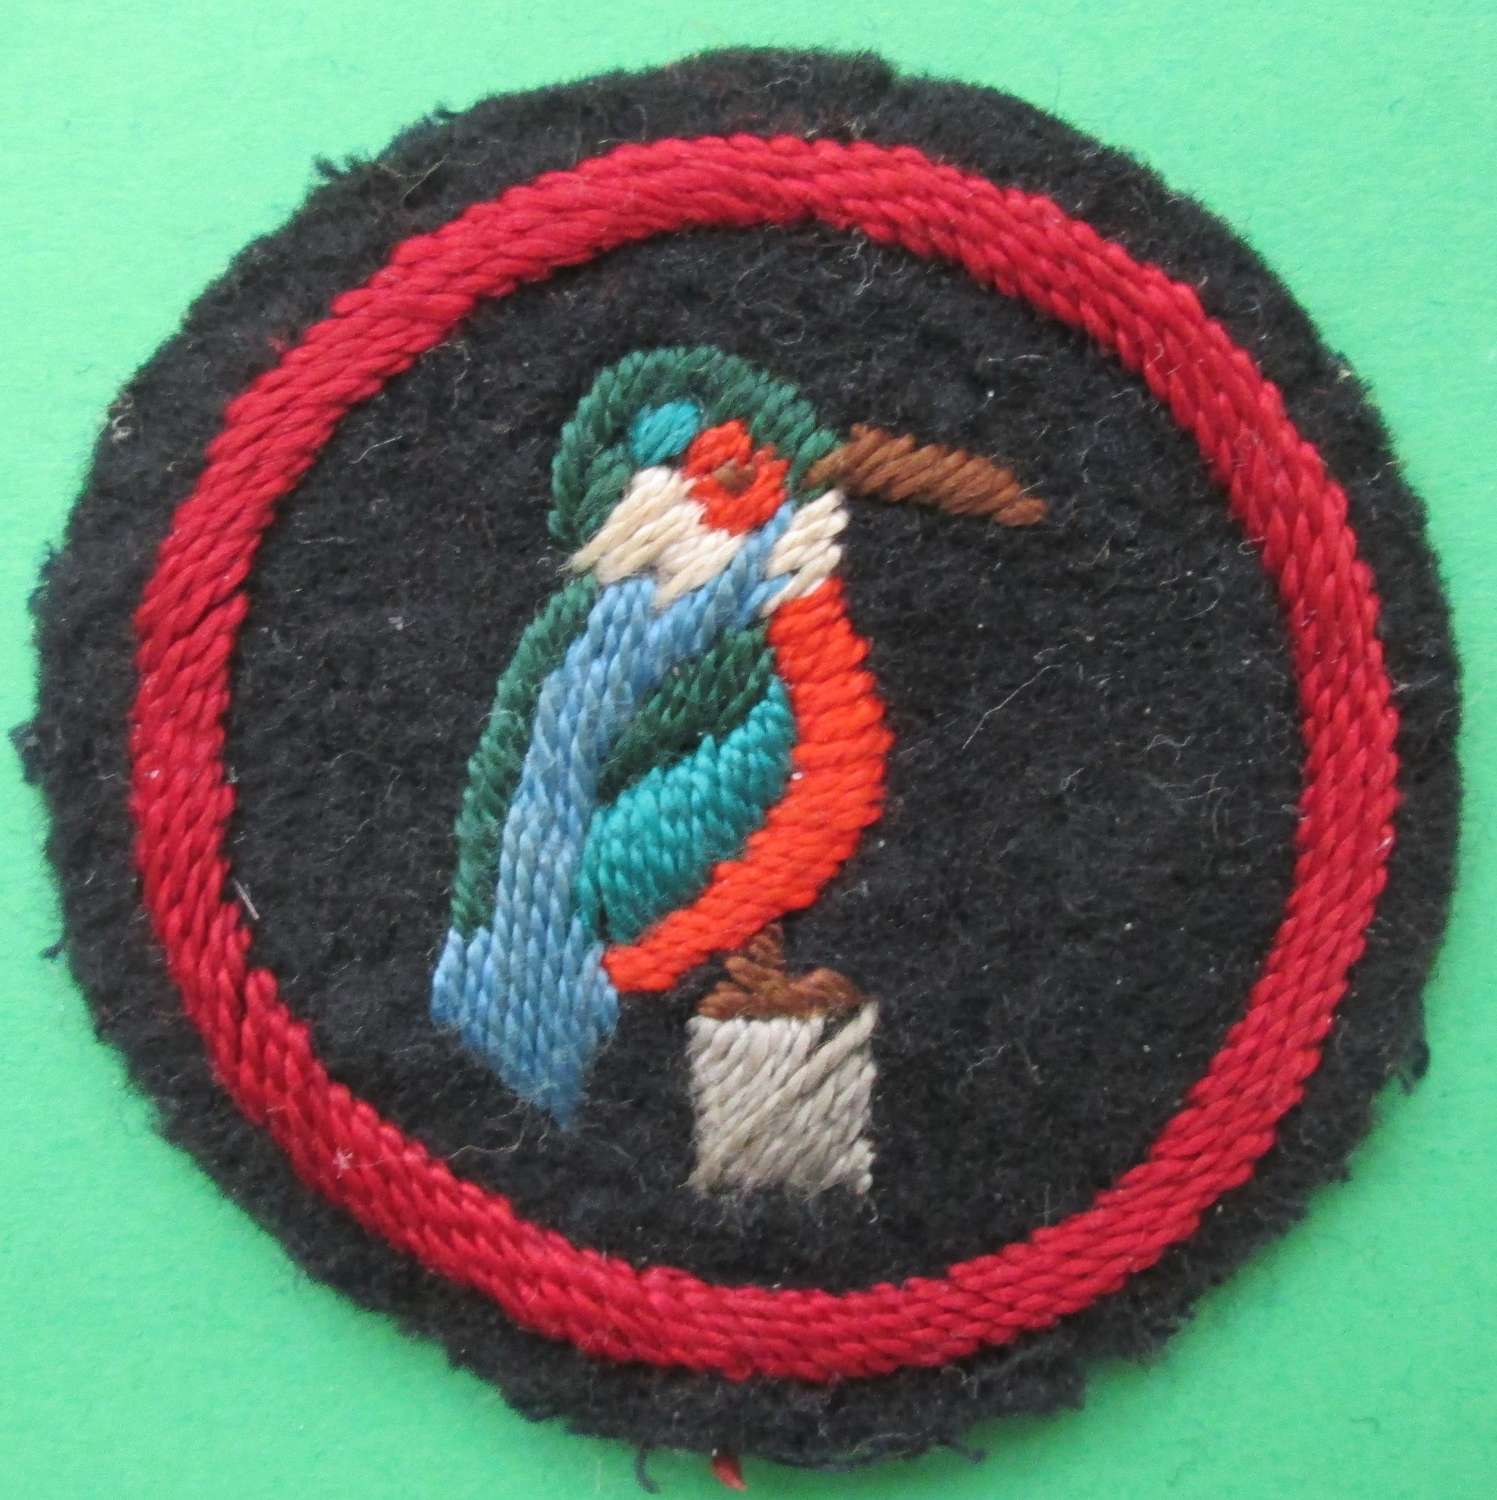 A  PATROL KINGFISHER EMBLEM BADGE FOR THE GIRL GUIDES